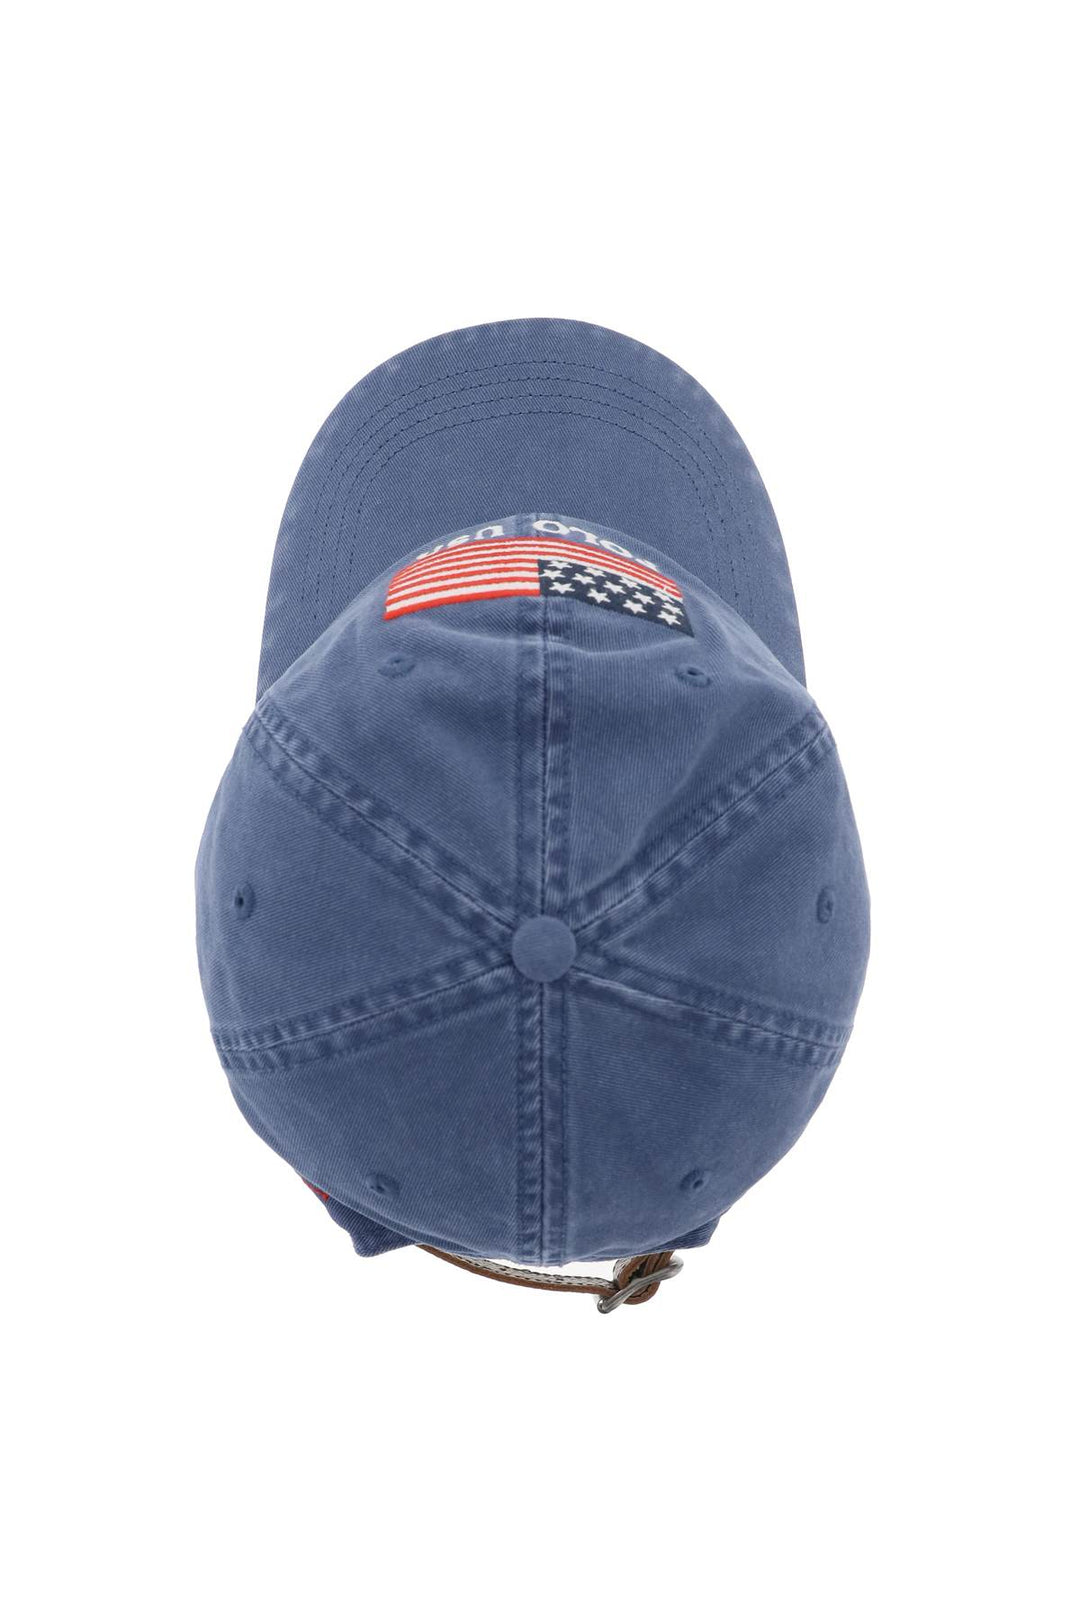 Polo Ralph Lauren Baseball Cap In Twill With Embroidered Flag   Blu